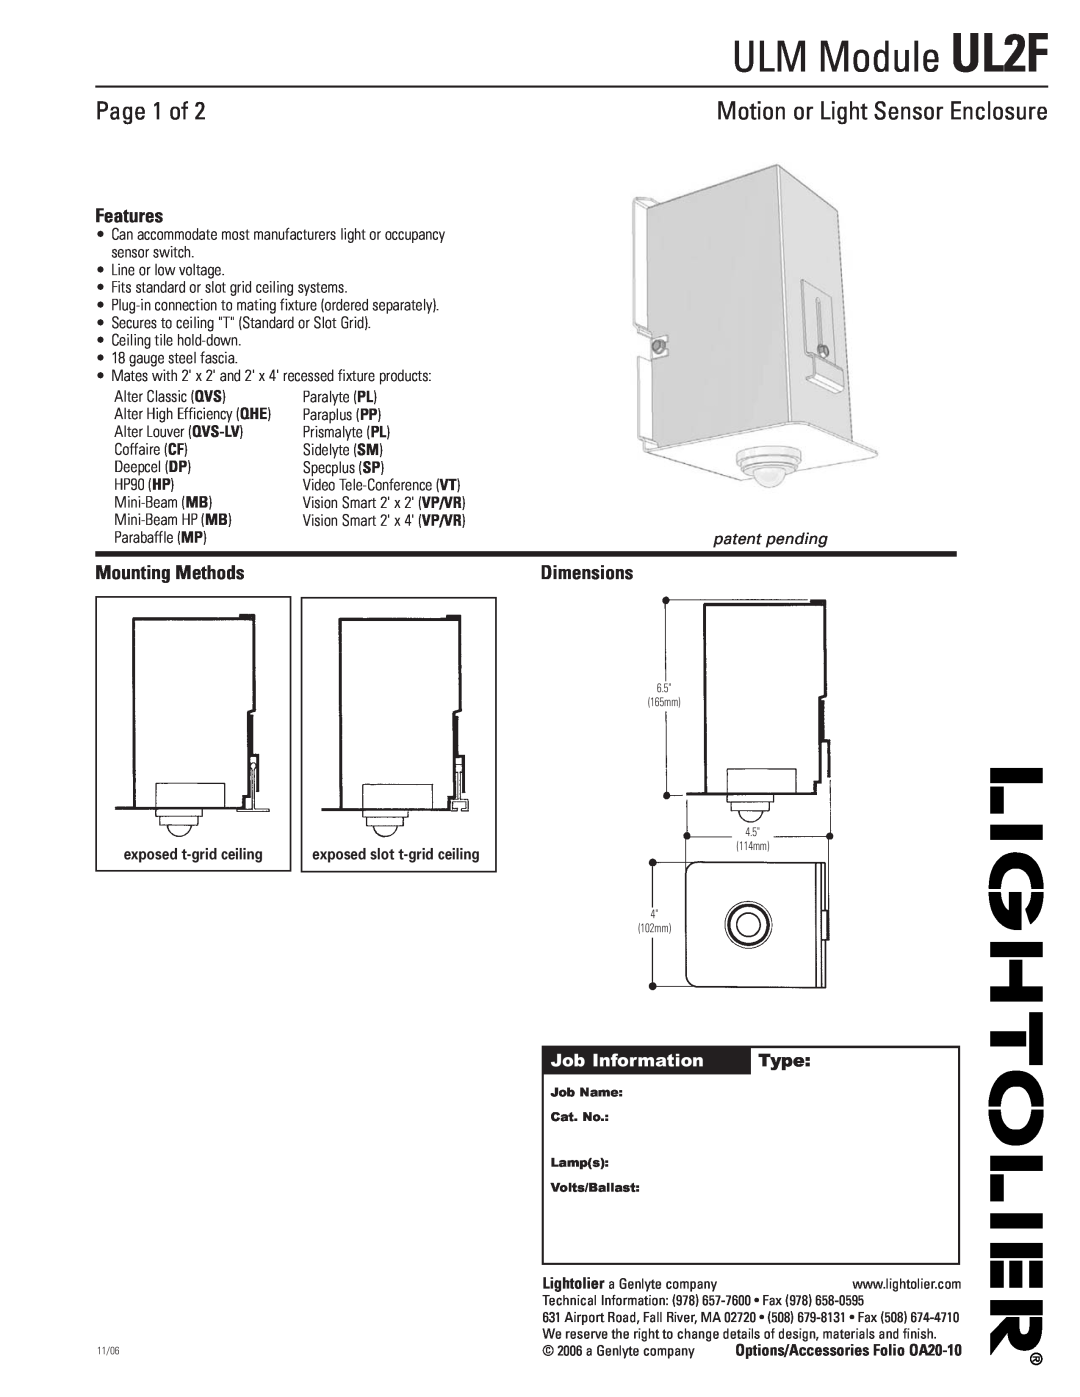 Lightolier OA20-10 dimensions ULM Module UL2F, Page 1 of, Motion or Light Sensor Enclosure, Features, Mounting Methods 